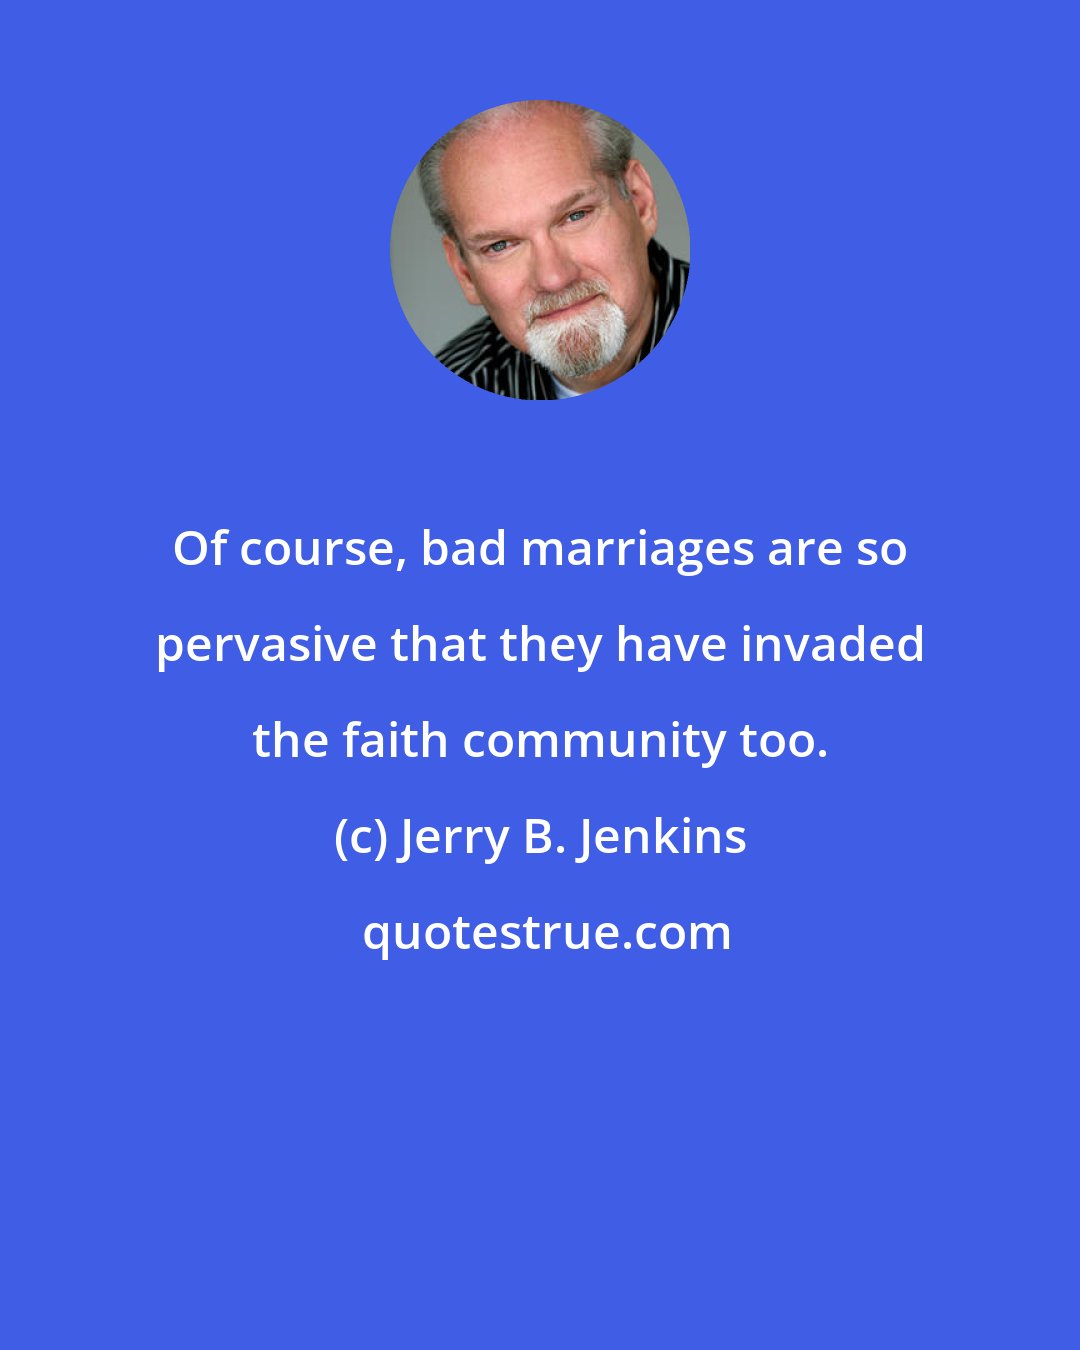 Jerry B. Jenkins: Of course, bad marriages are so pervasive that they have invaded the faith community too.